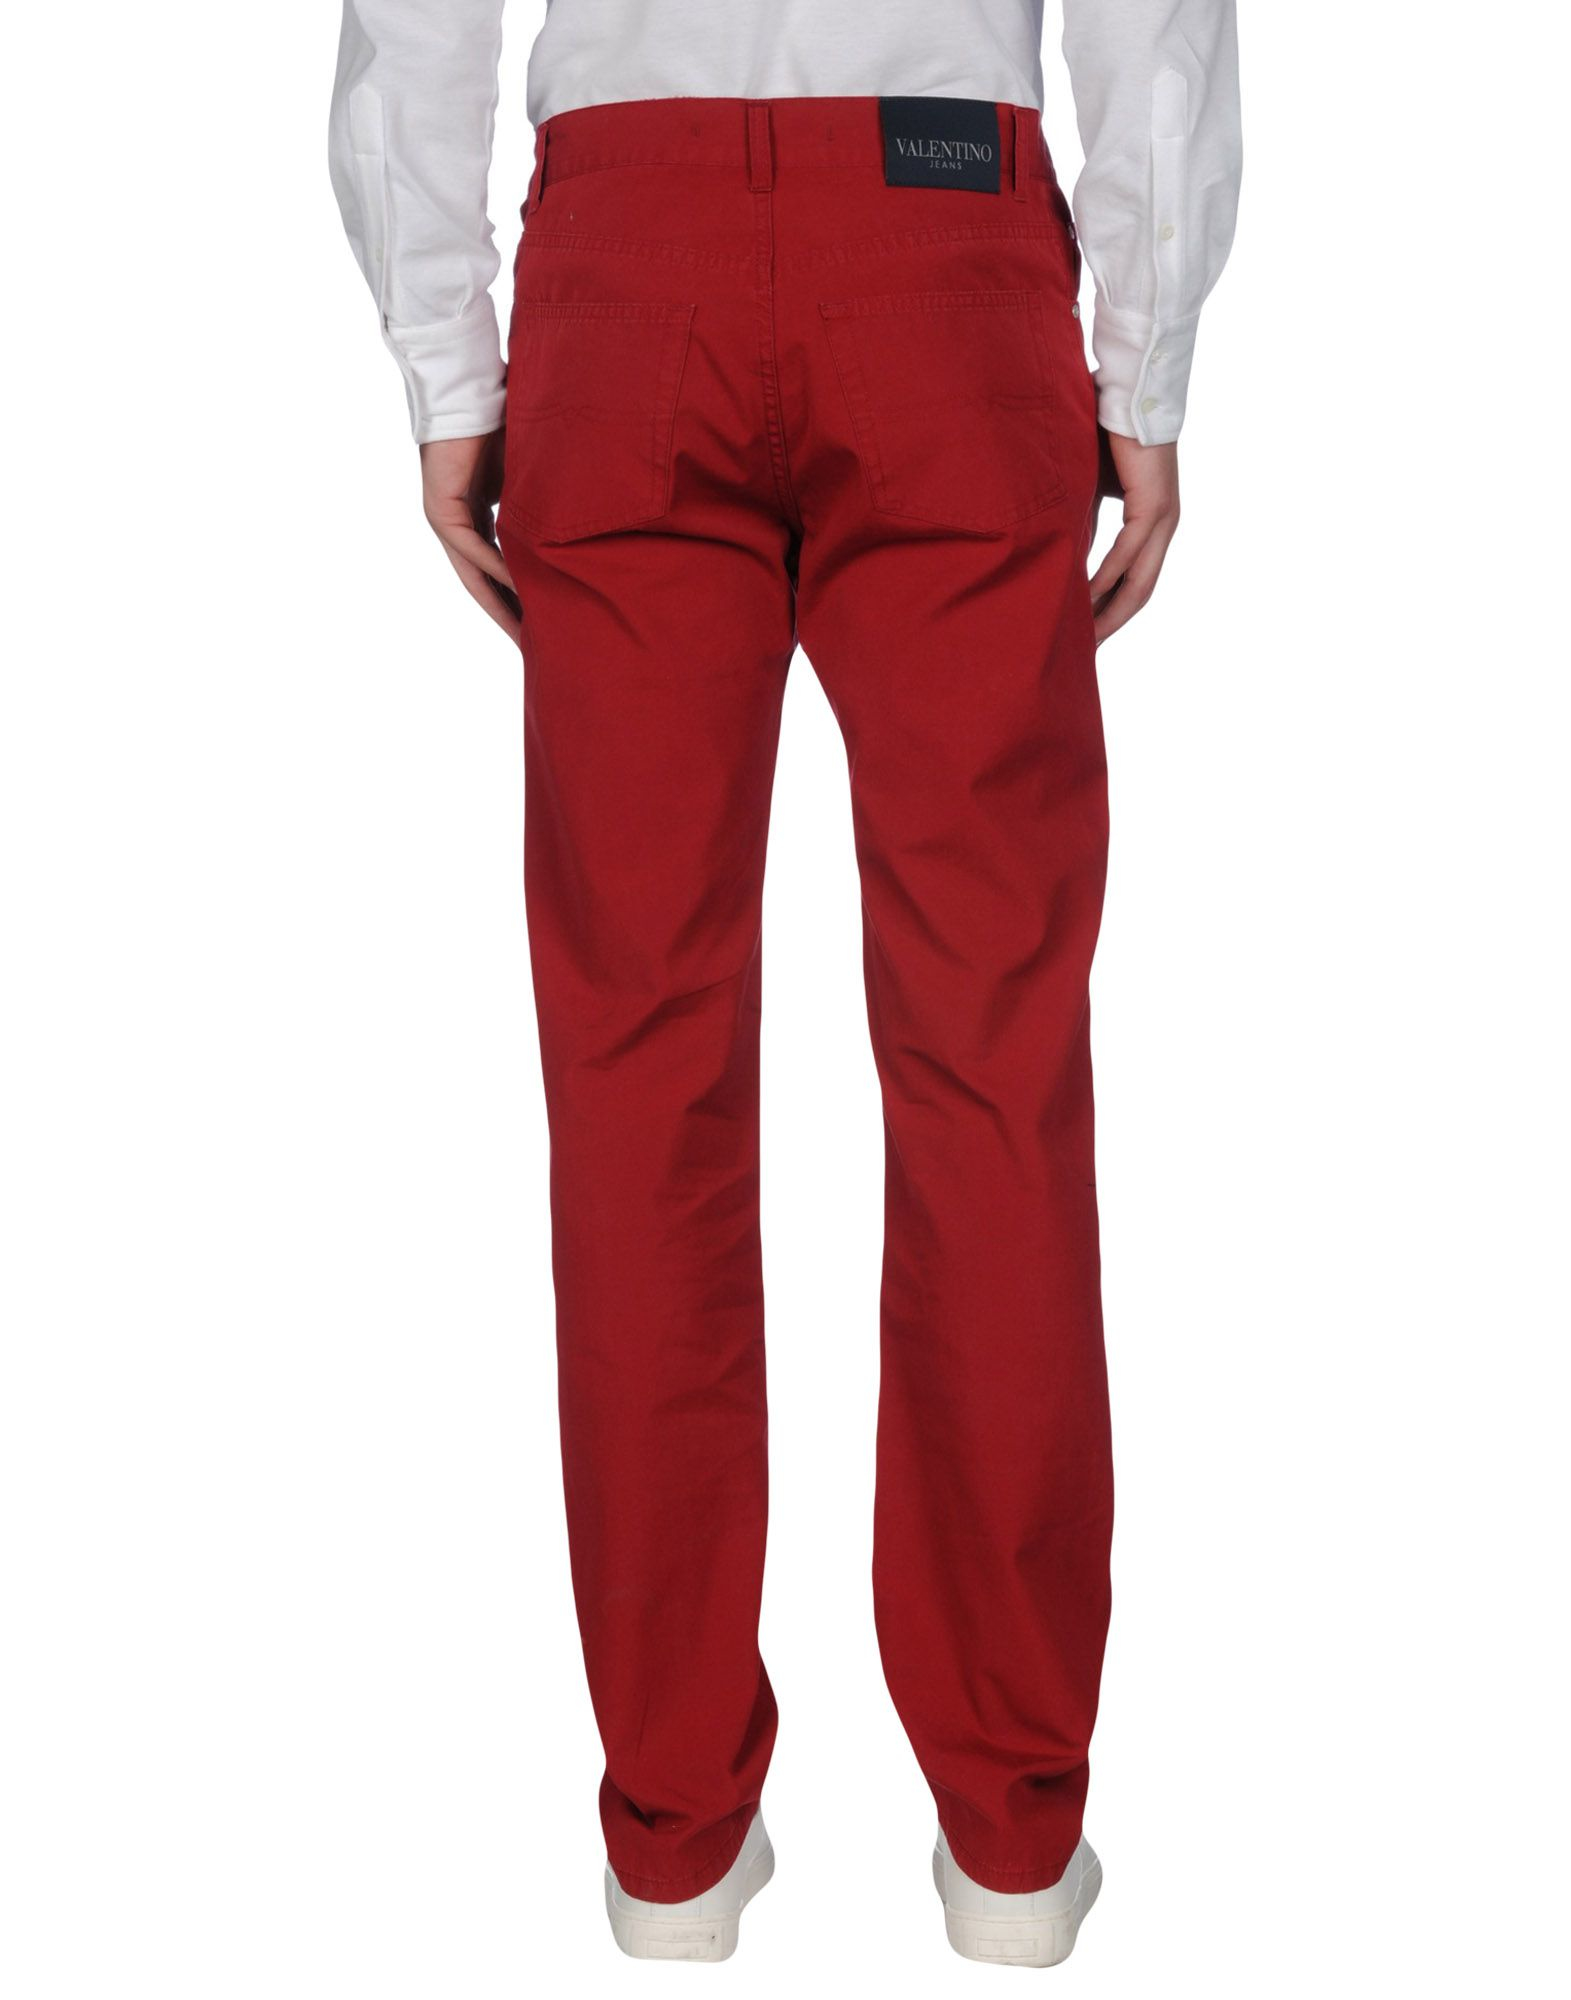 Valentino Casual Pants in Red for Men - Lyst